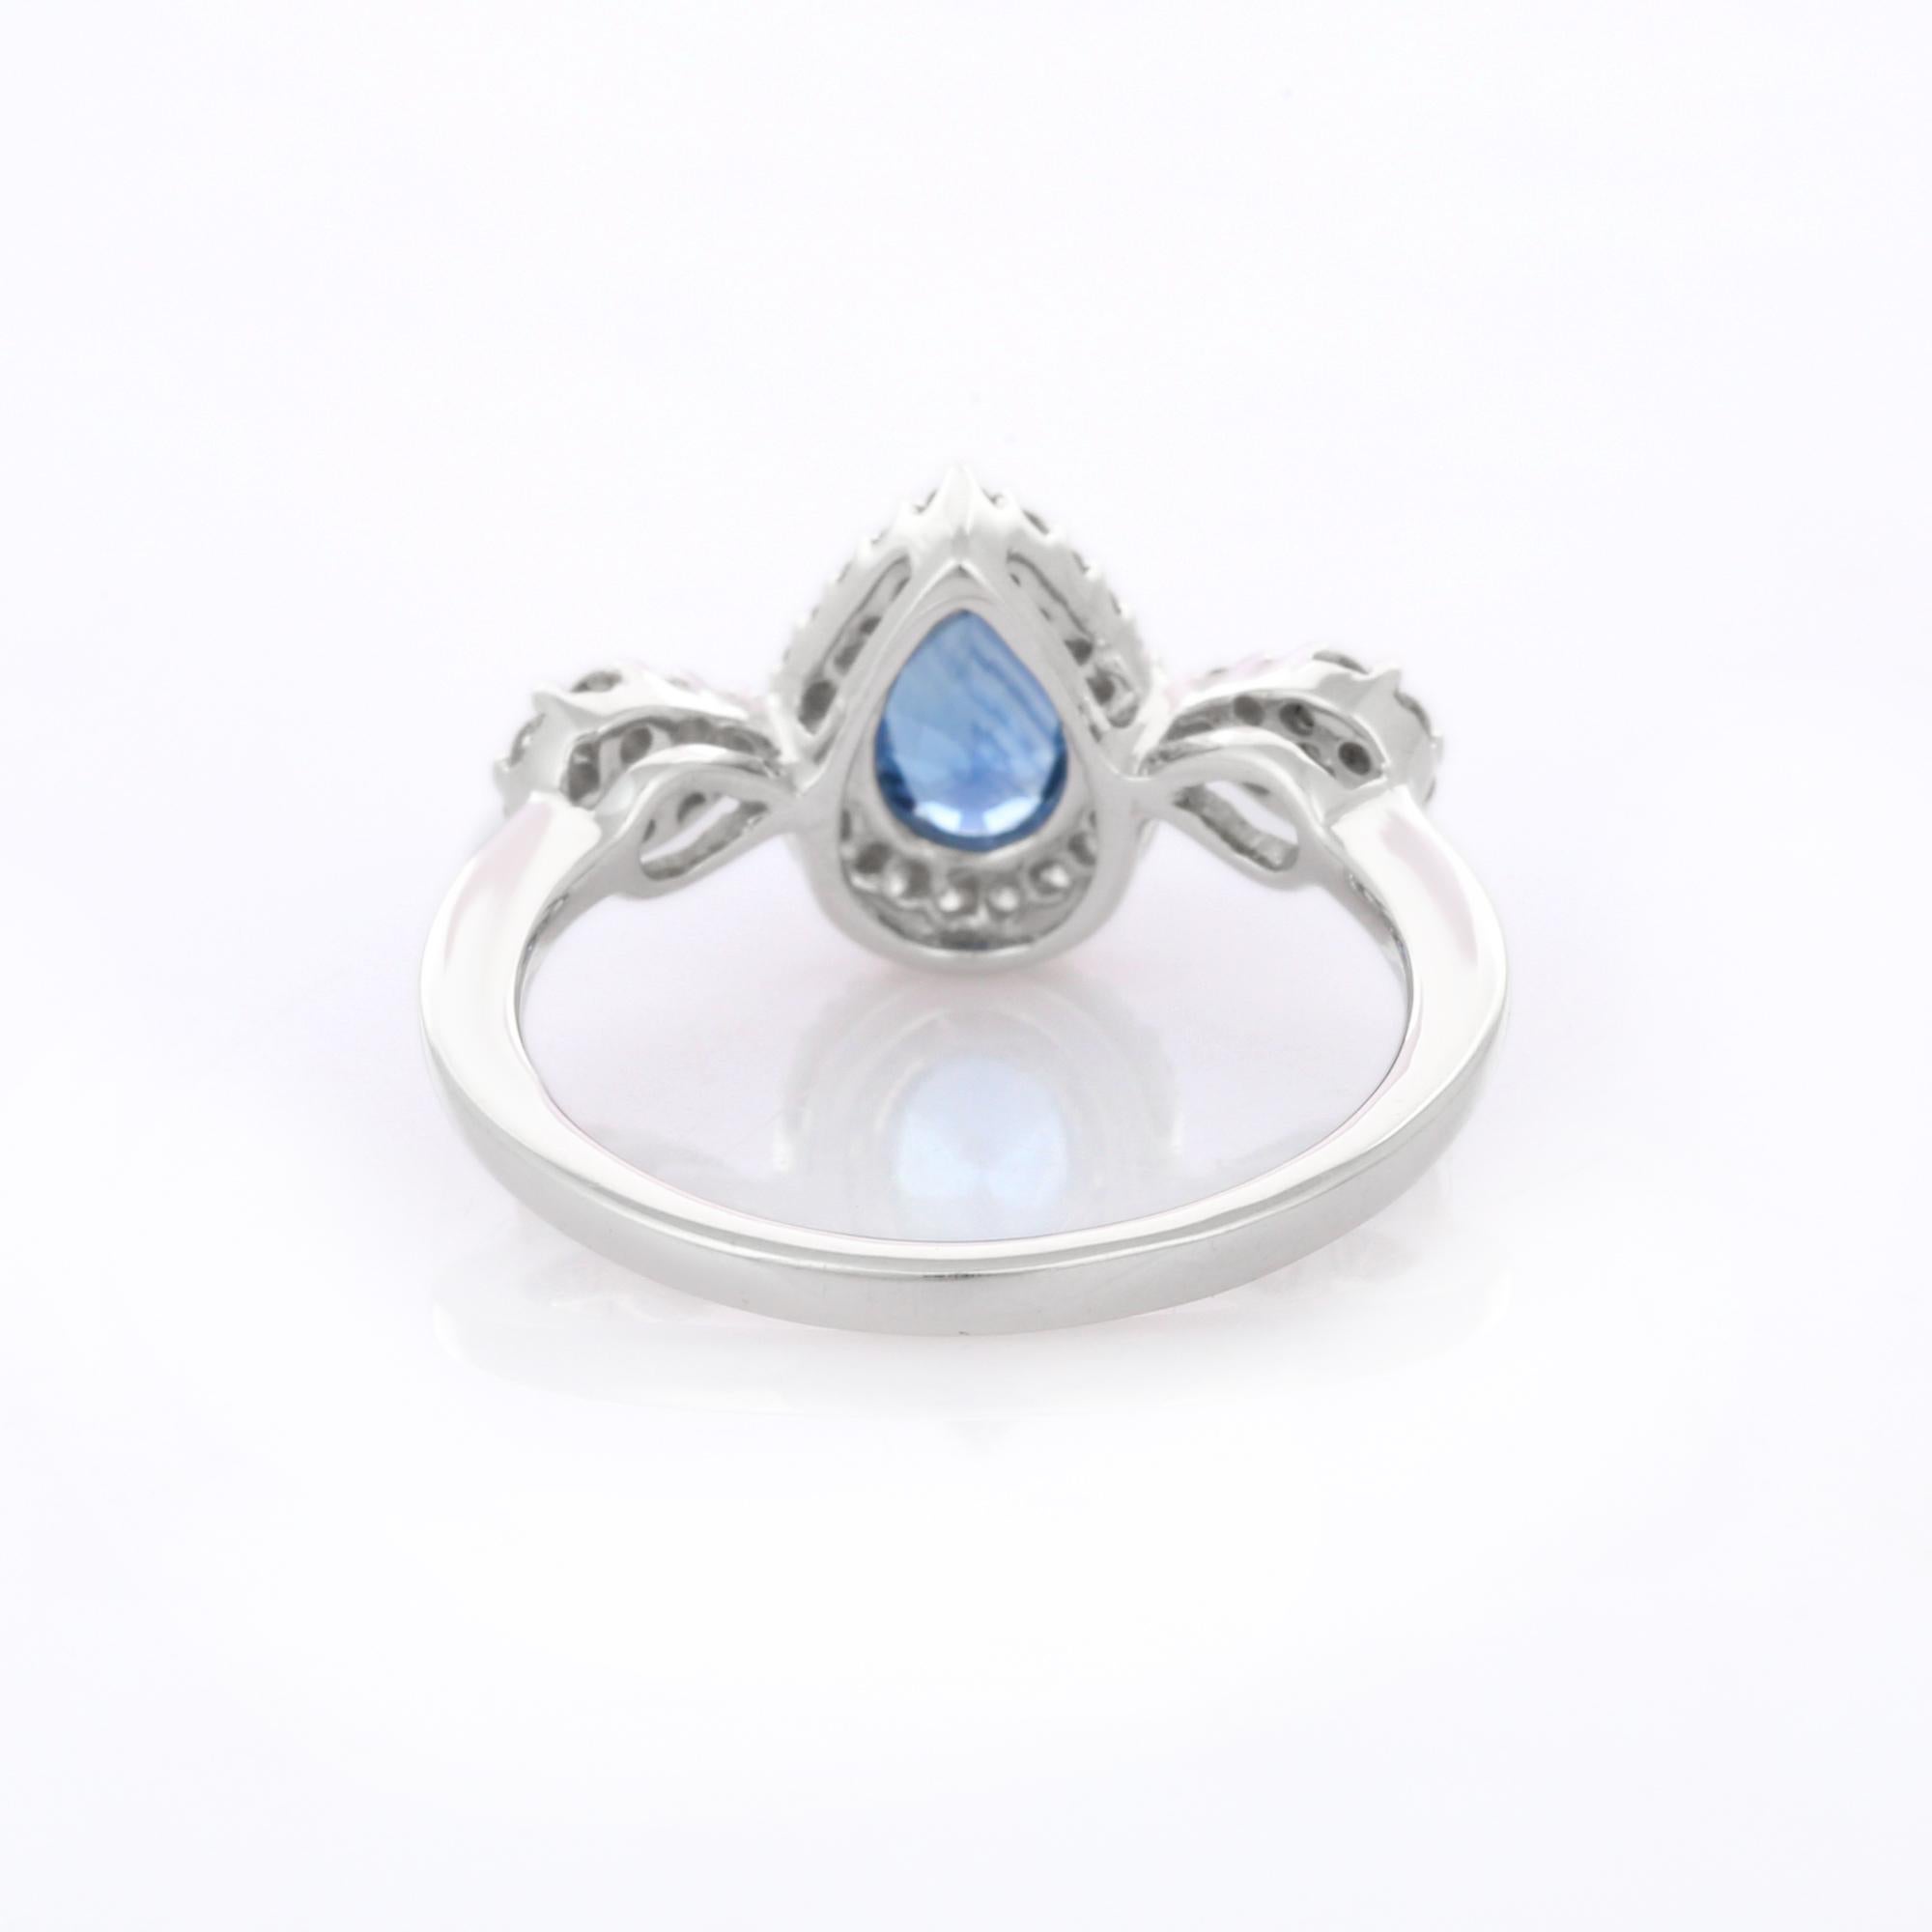 For Sale:  Blue Sapphire Engagement Ring, Ringed with Diamonds in 18K White Gold  4